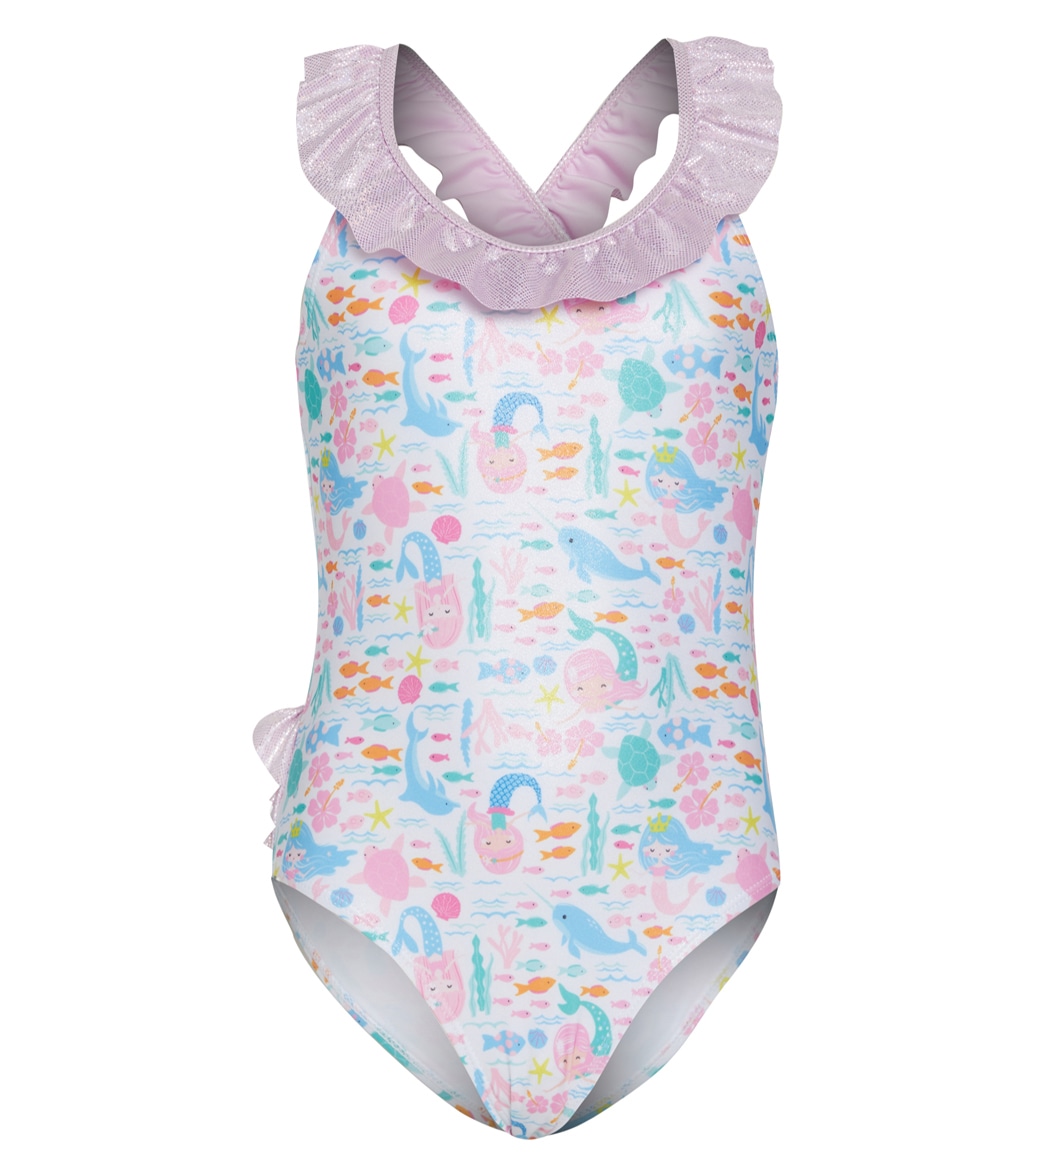 Flap Happy Girls' Fantasea Mermaids Mindy Upf 50+ One Piece Swimsuit Baby Toddler - 12 Months - Swimoutlet.com